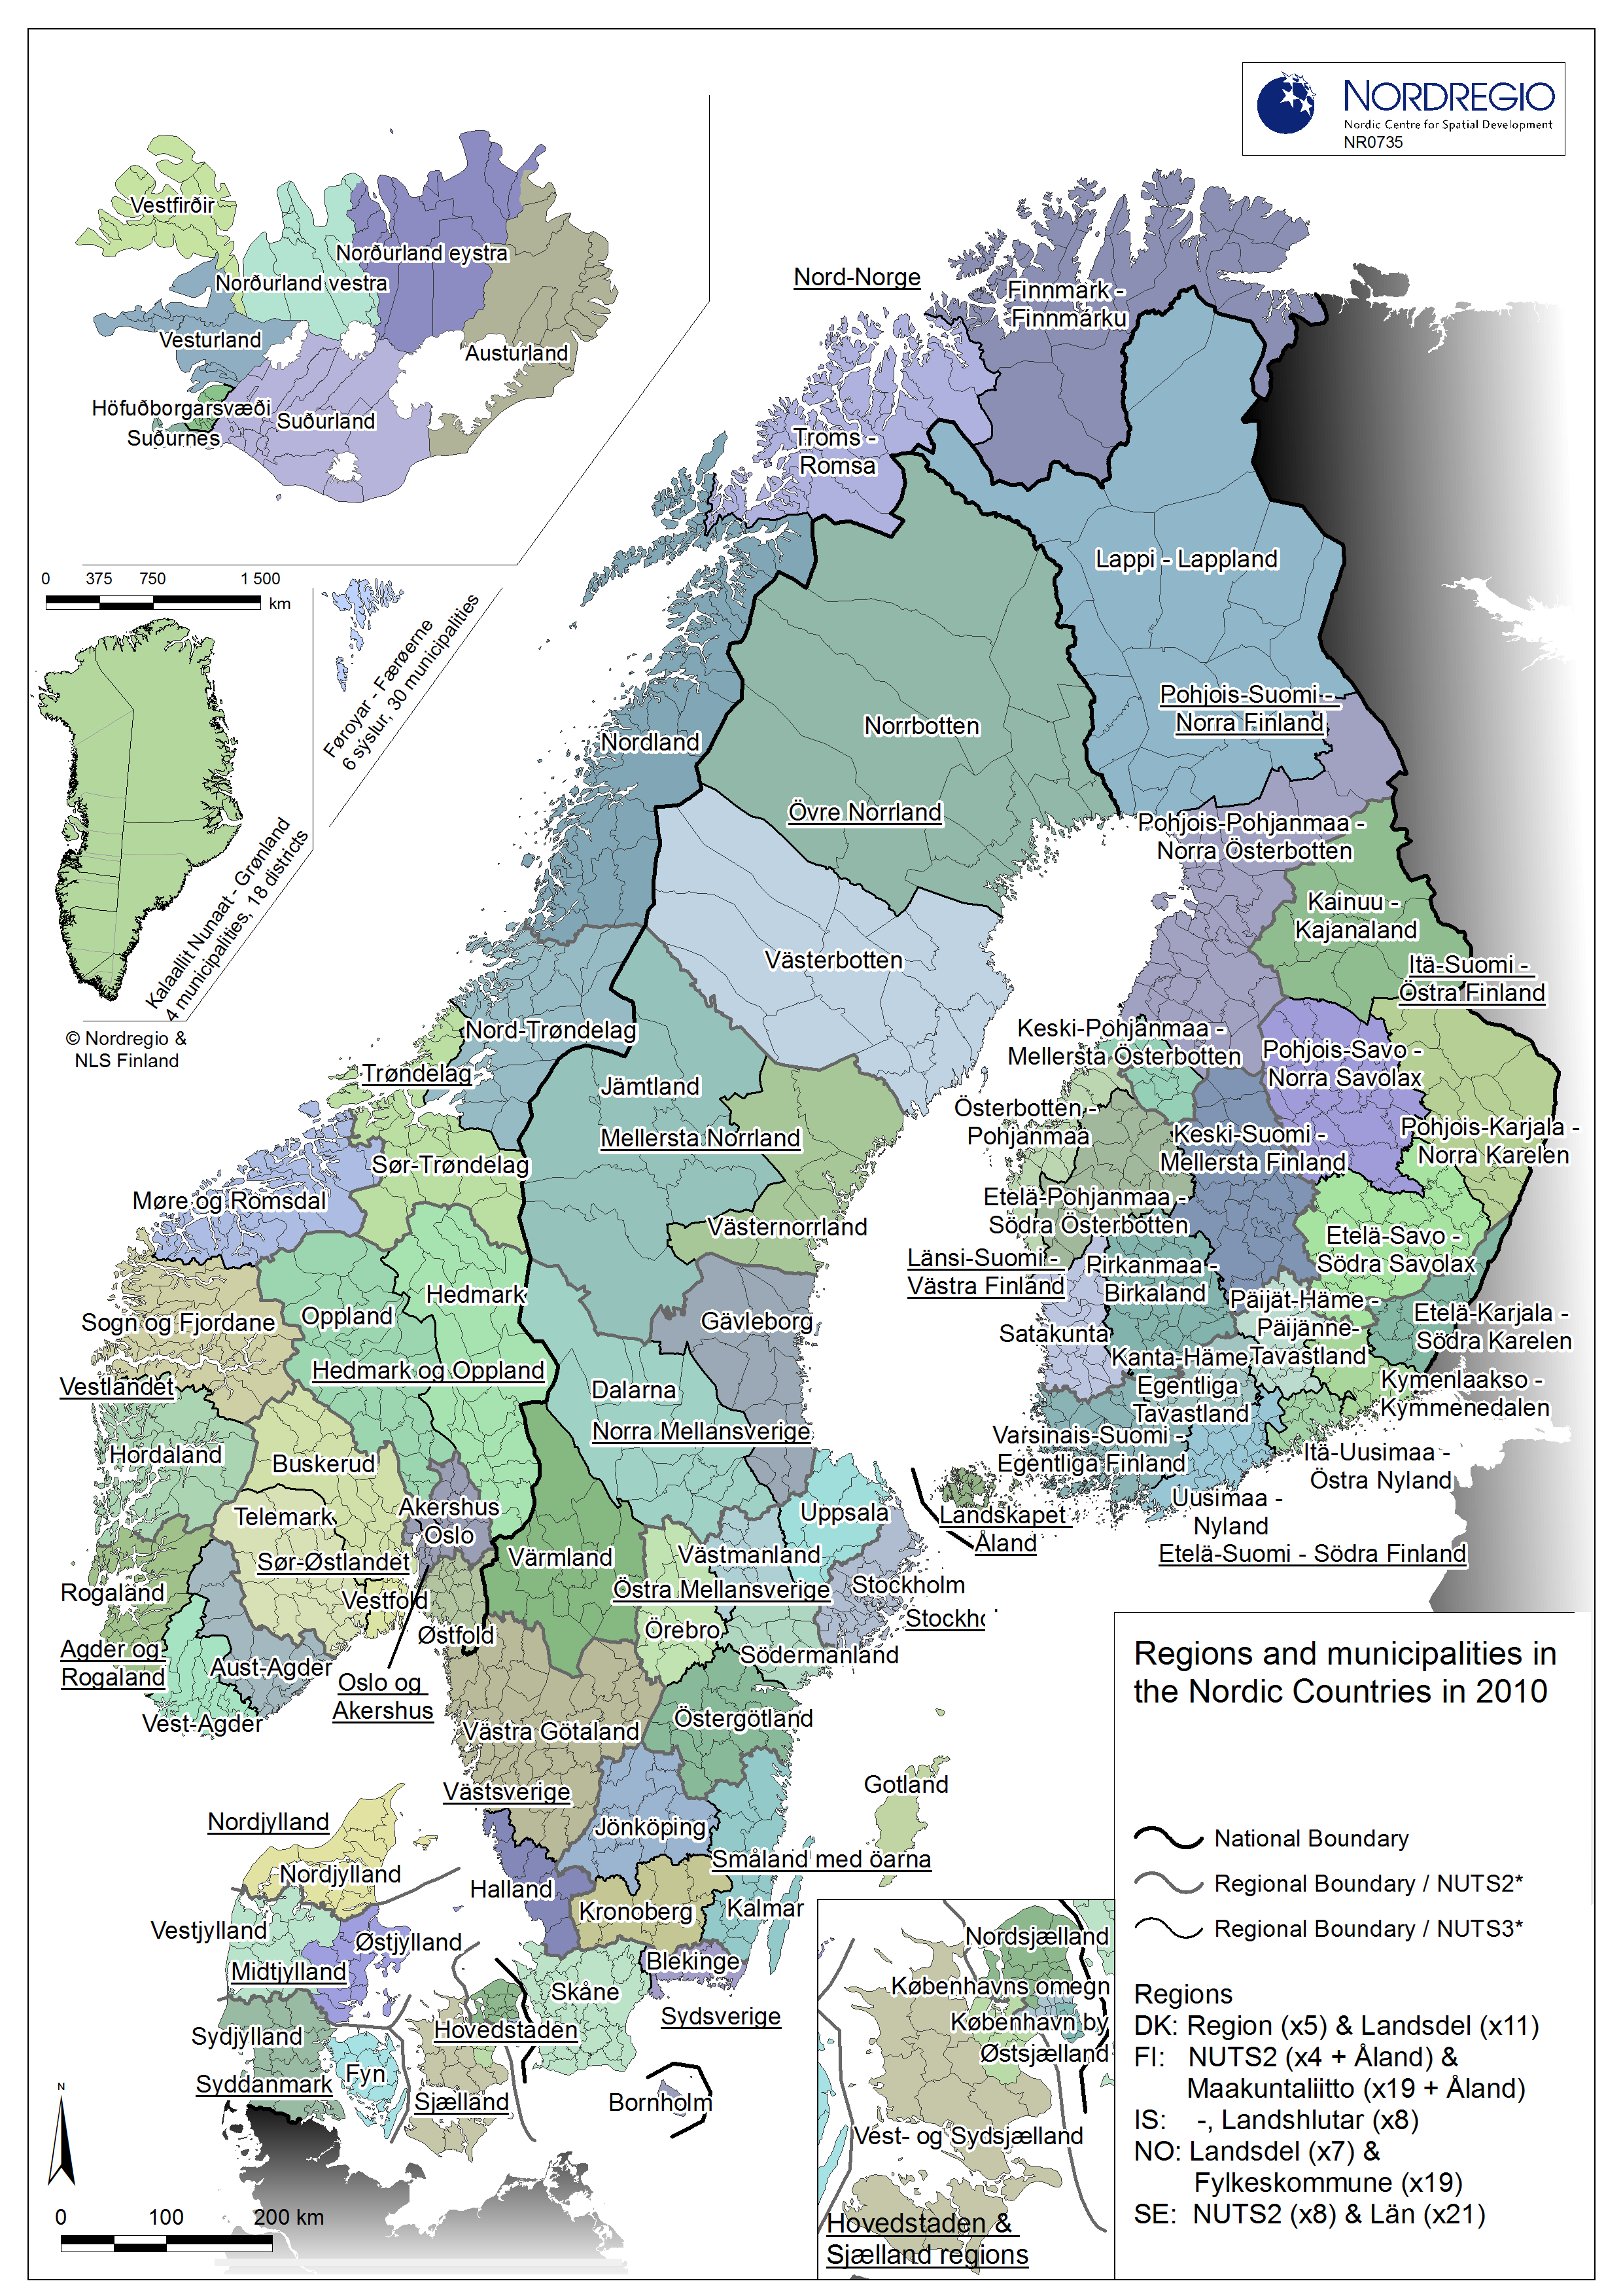 Nordregio in the Nordic countries